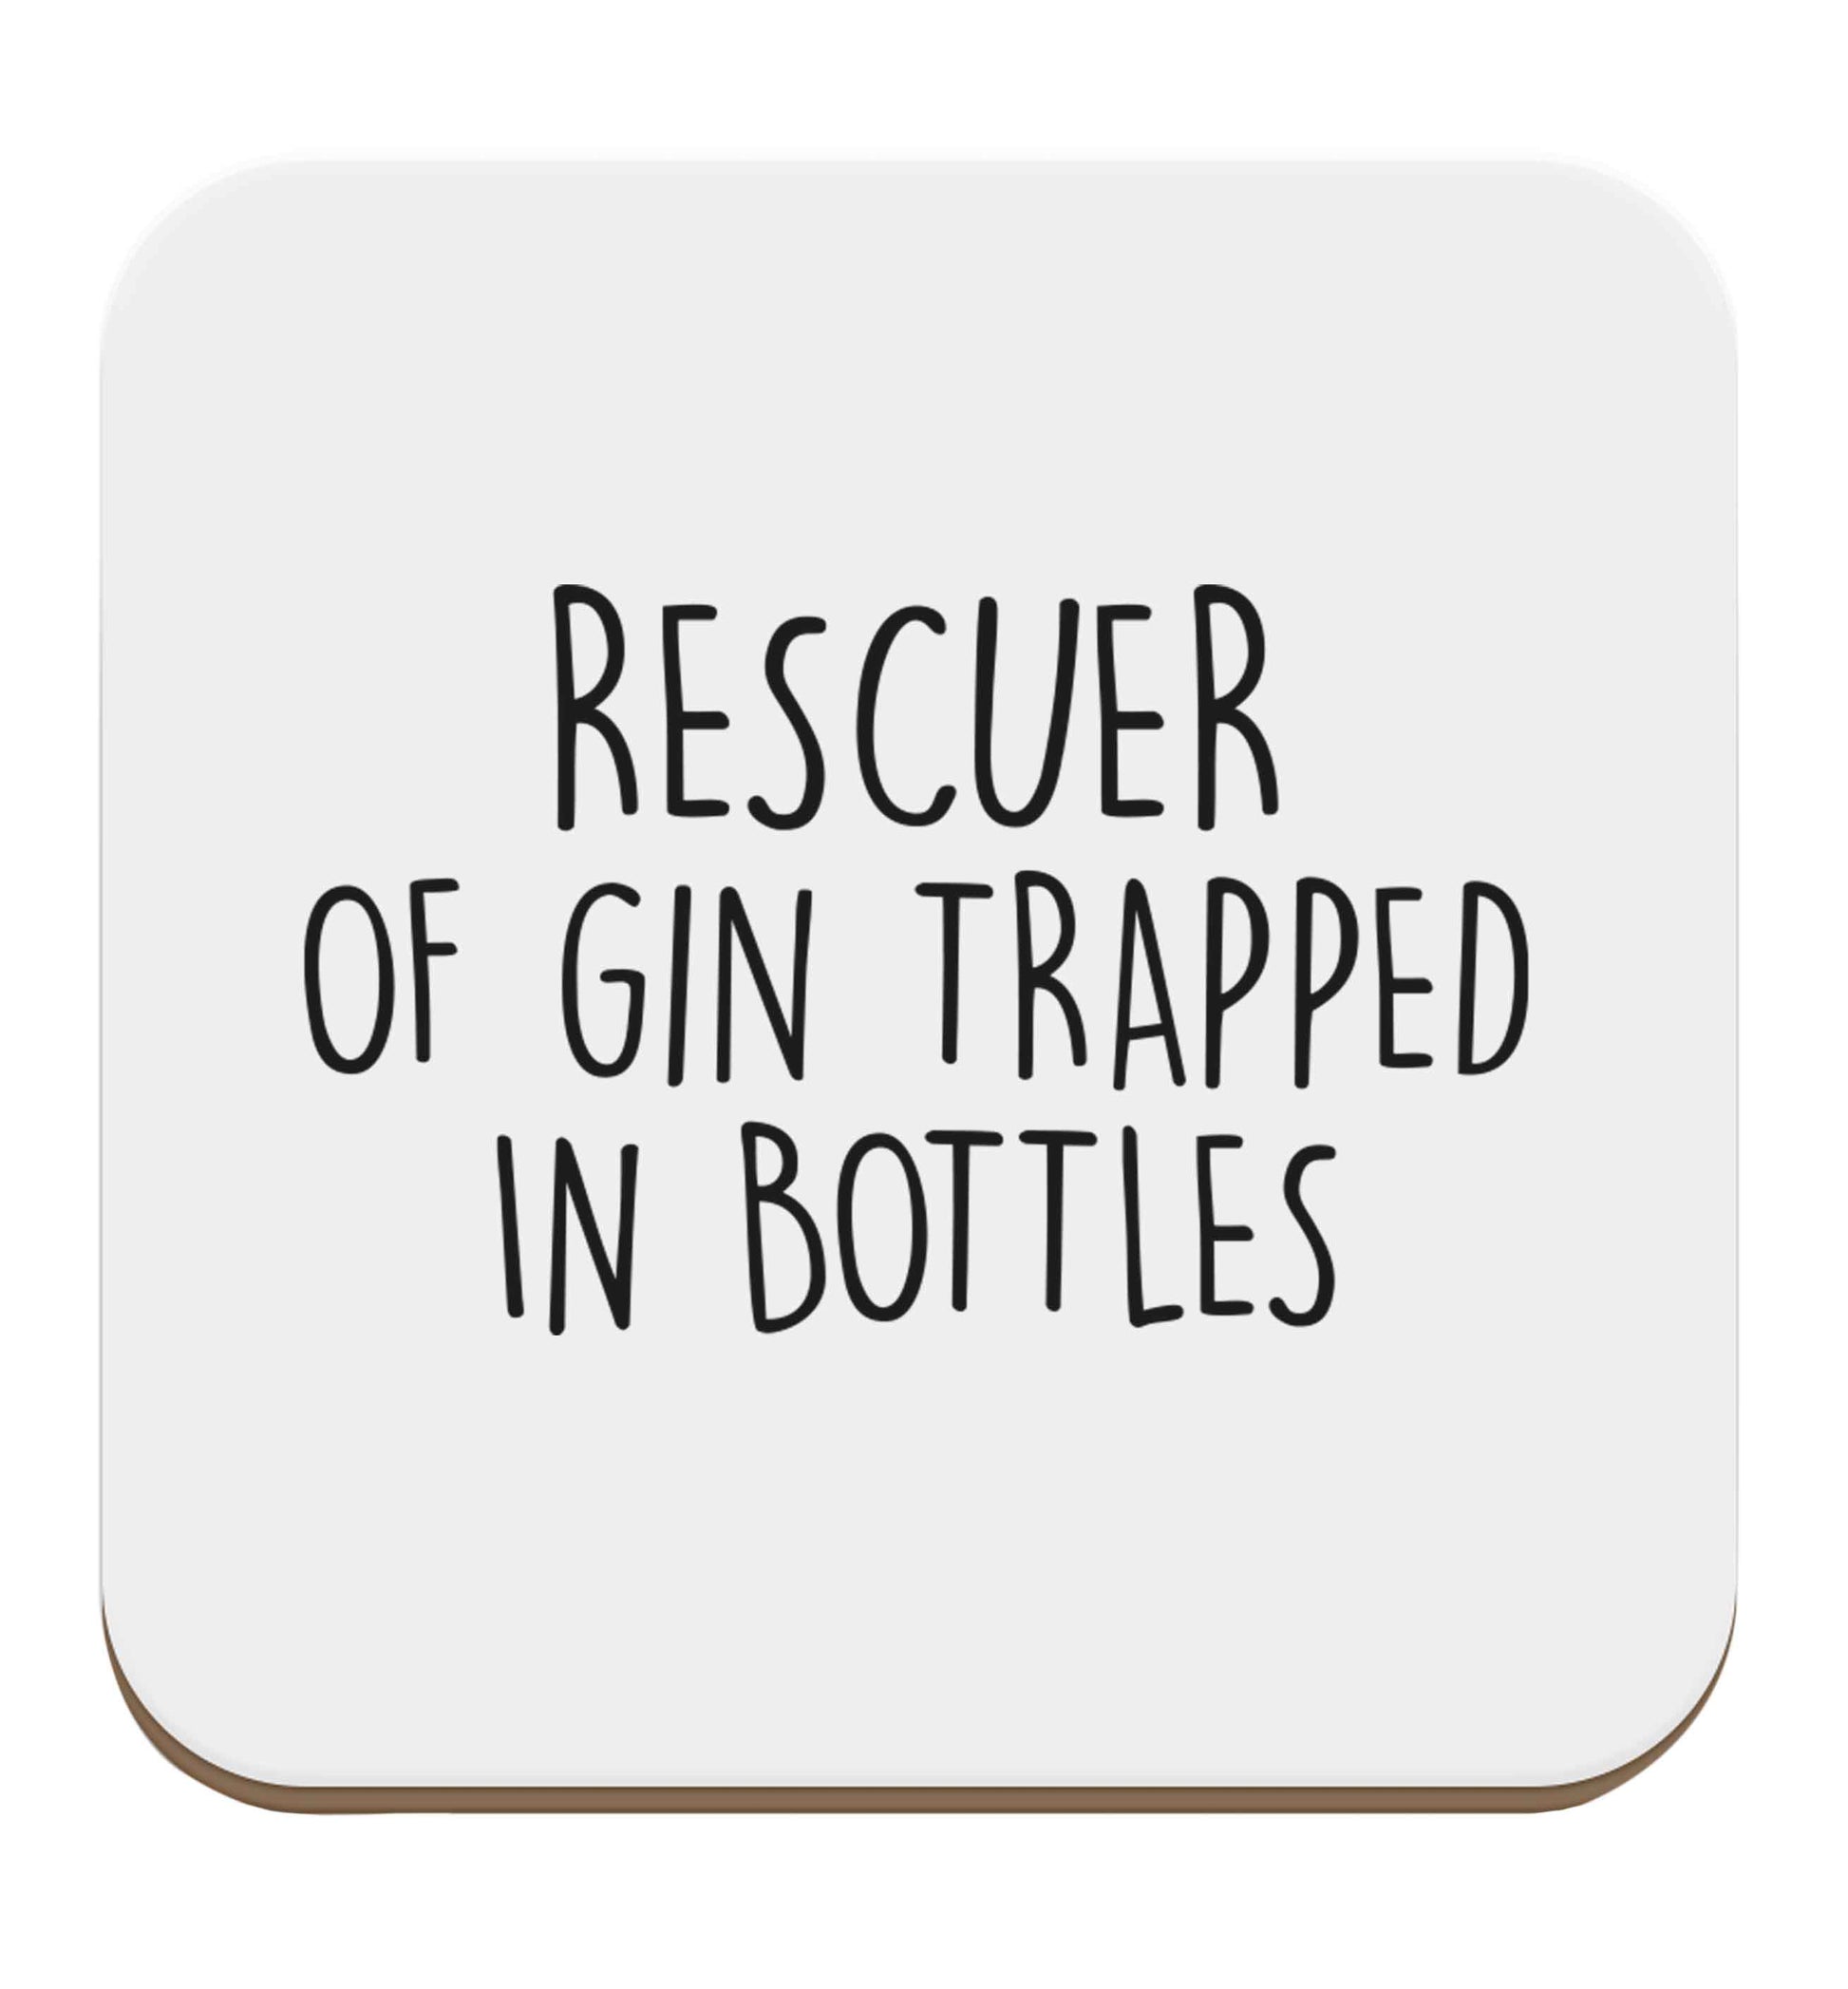 Rescuer of gin trapped in bottles set of four coasters